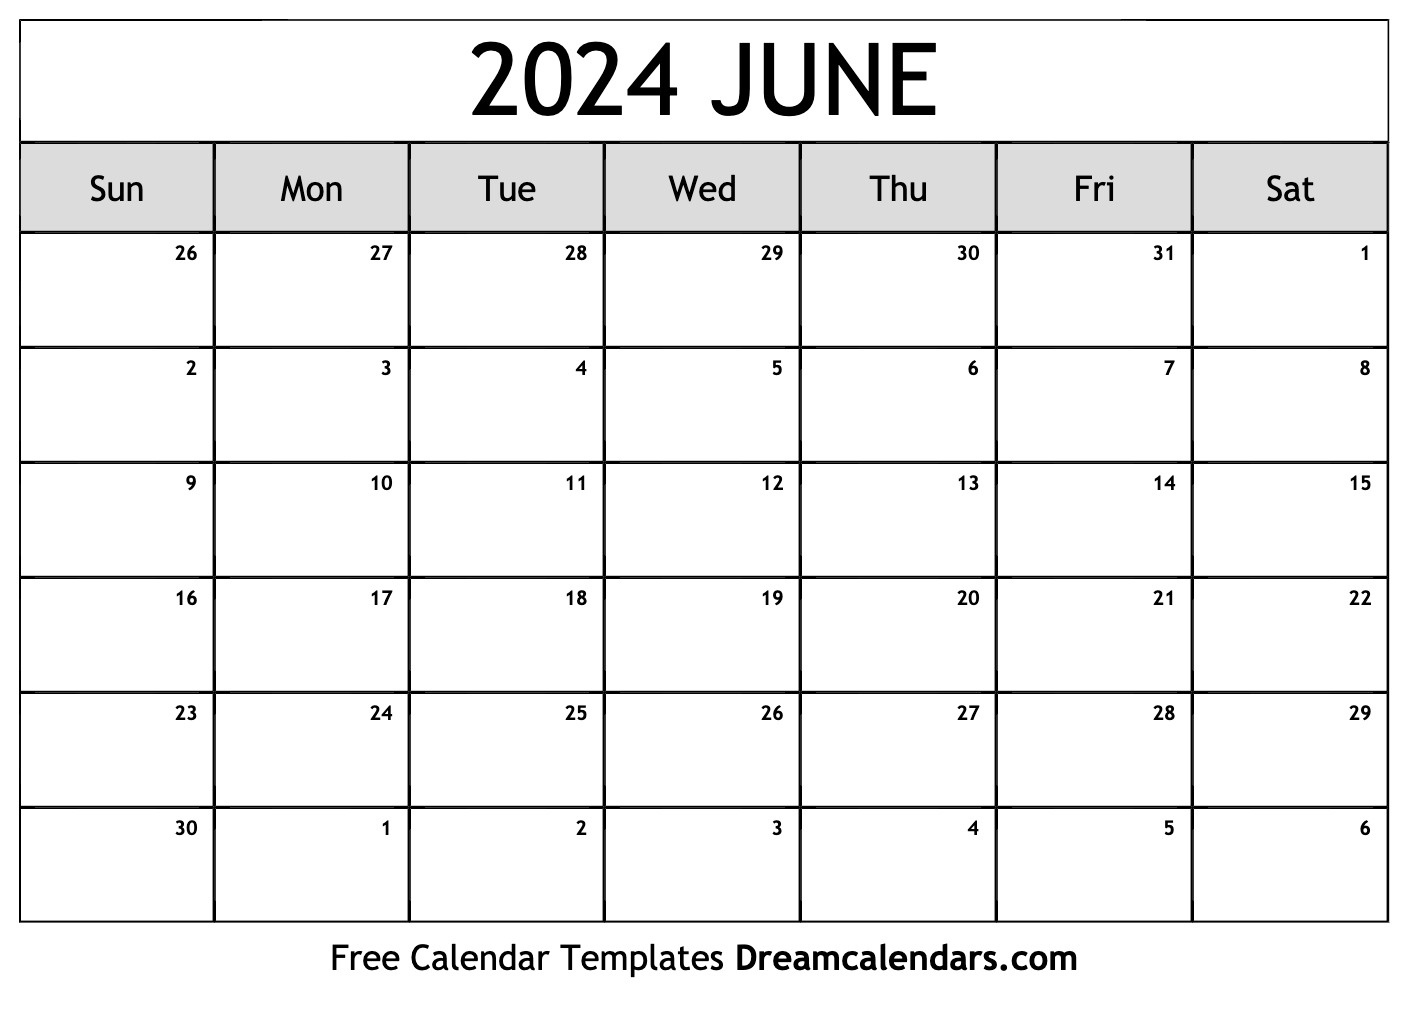 June 2024 Calendar - Free Printable With Holidays And Observances throughout June 20Th 2024 Calendar